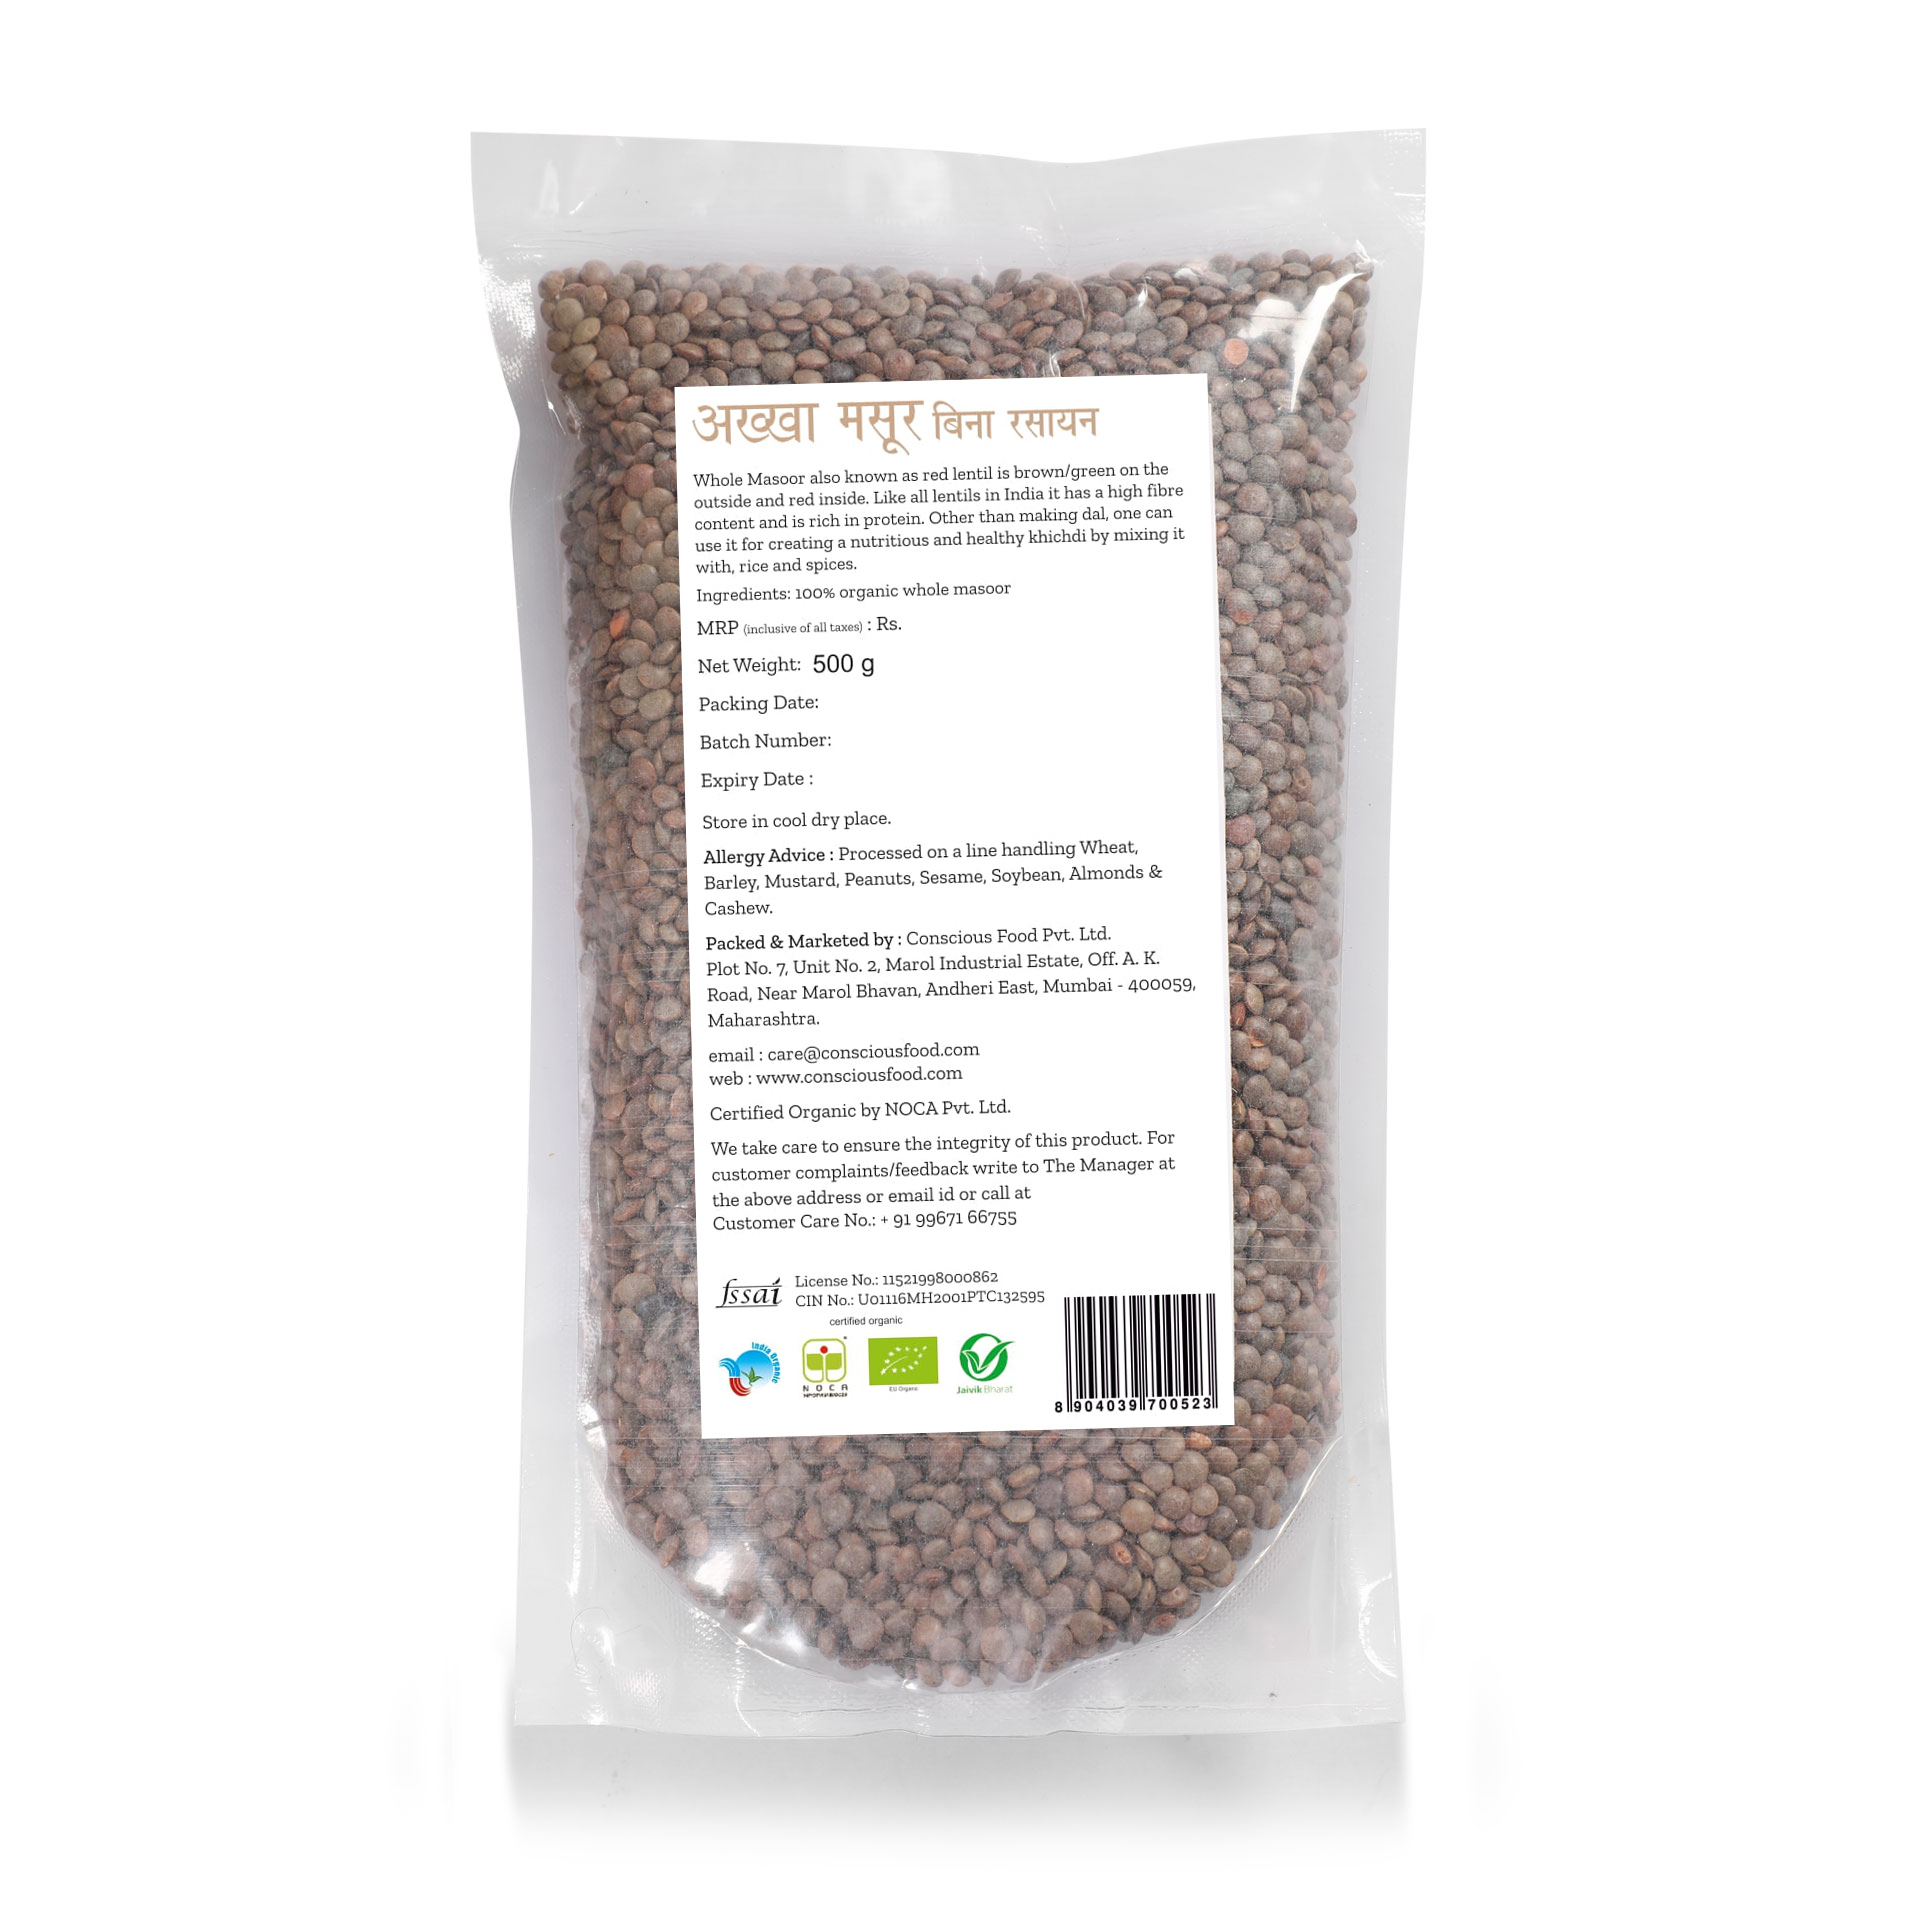 Product: Conscious Food Whole Red Lentil (Masoor Whole) 500g